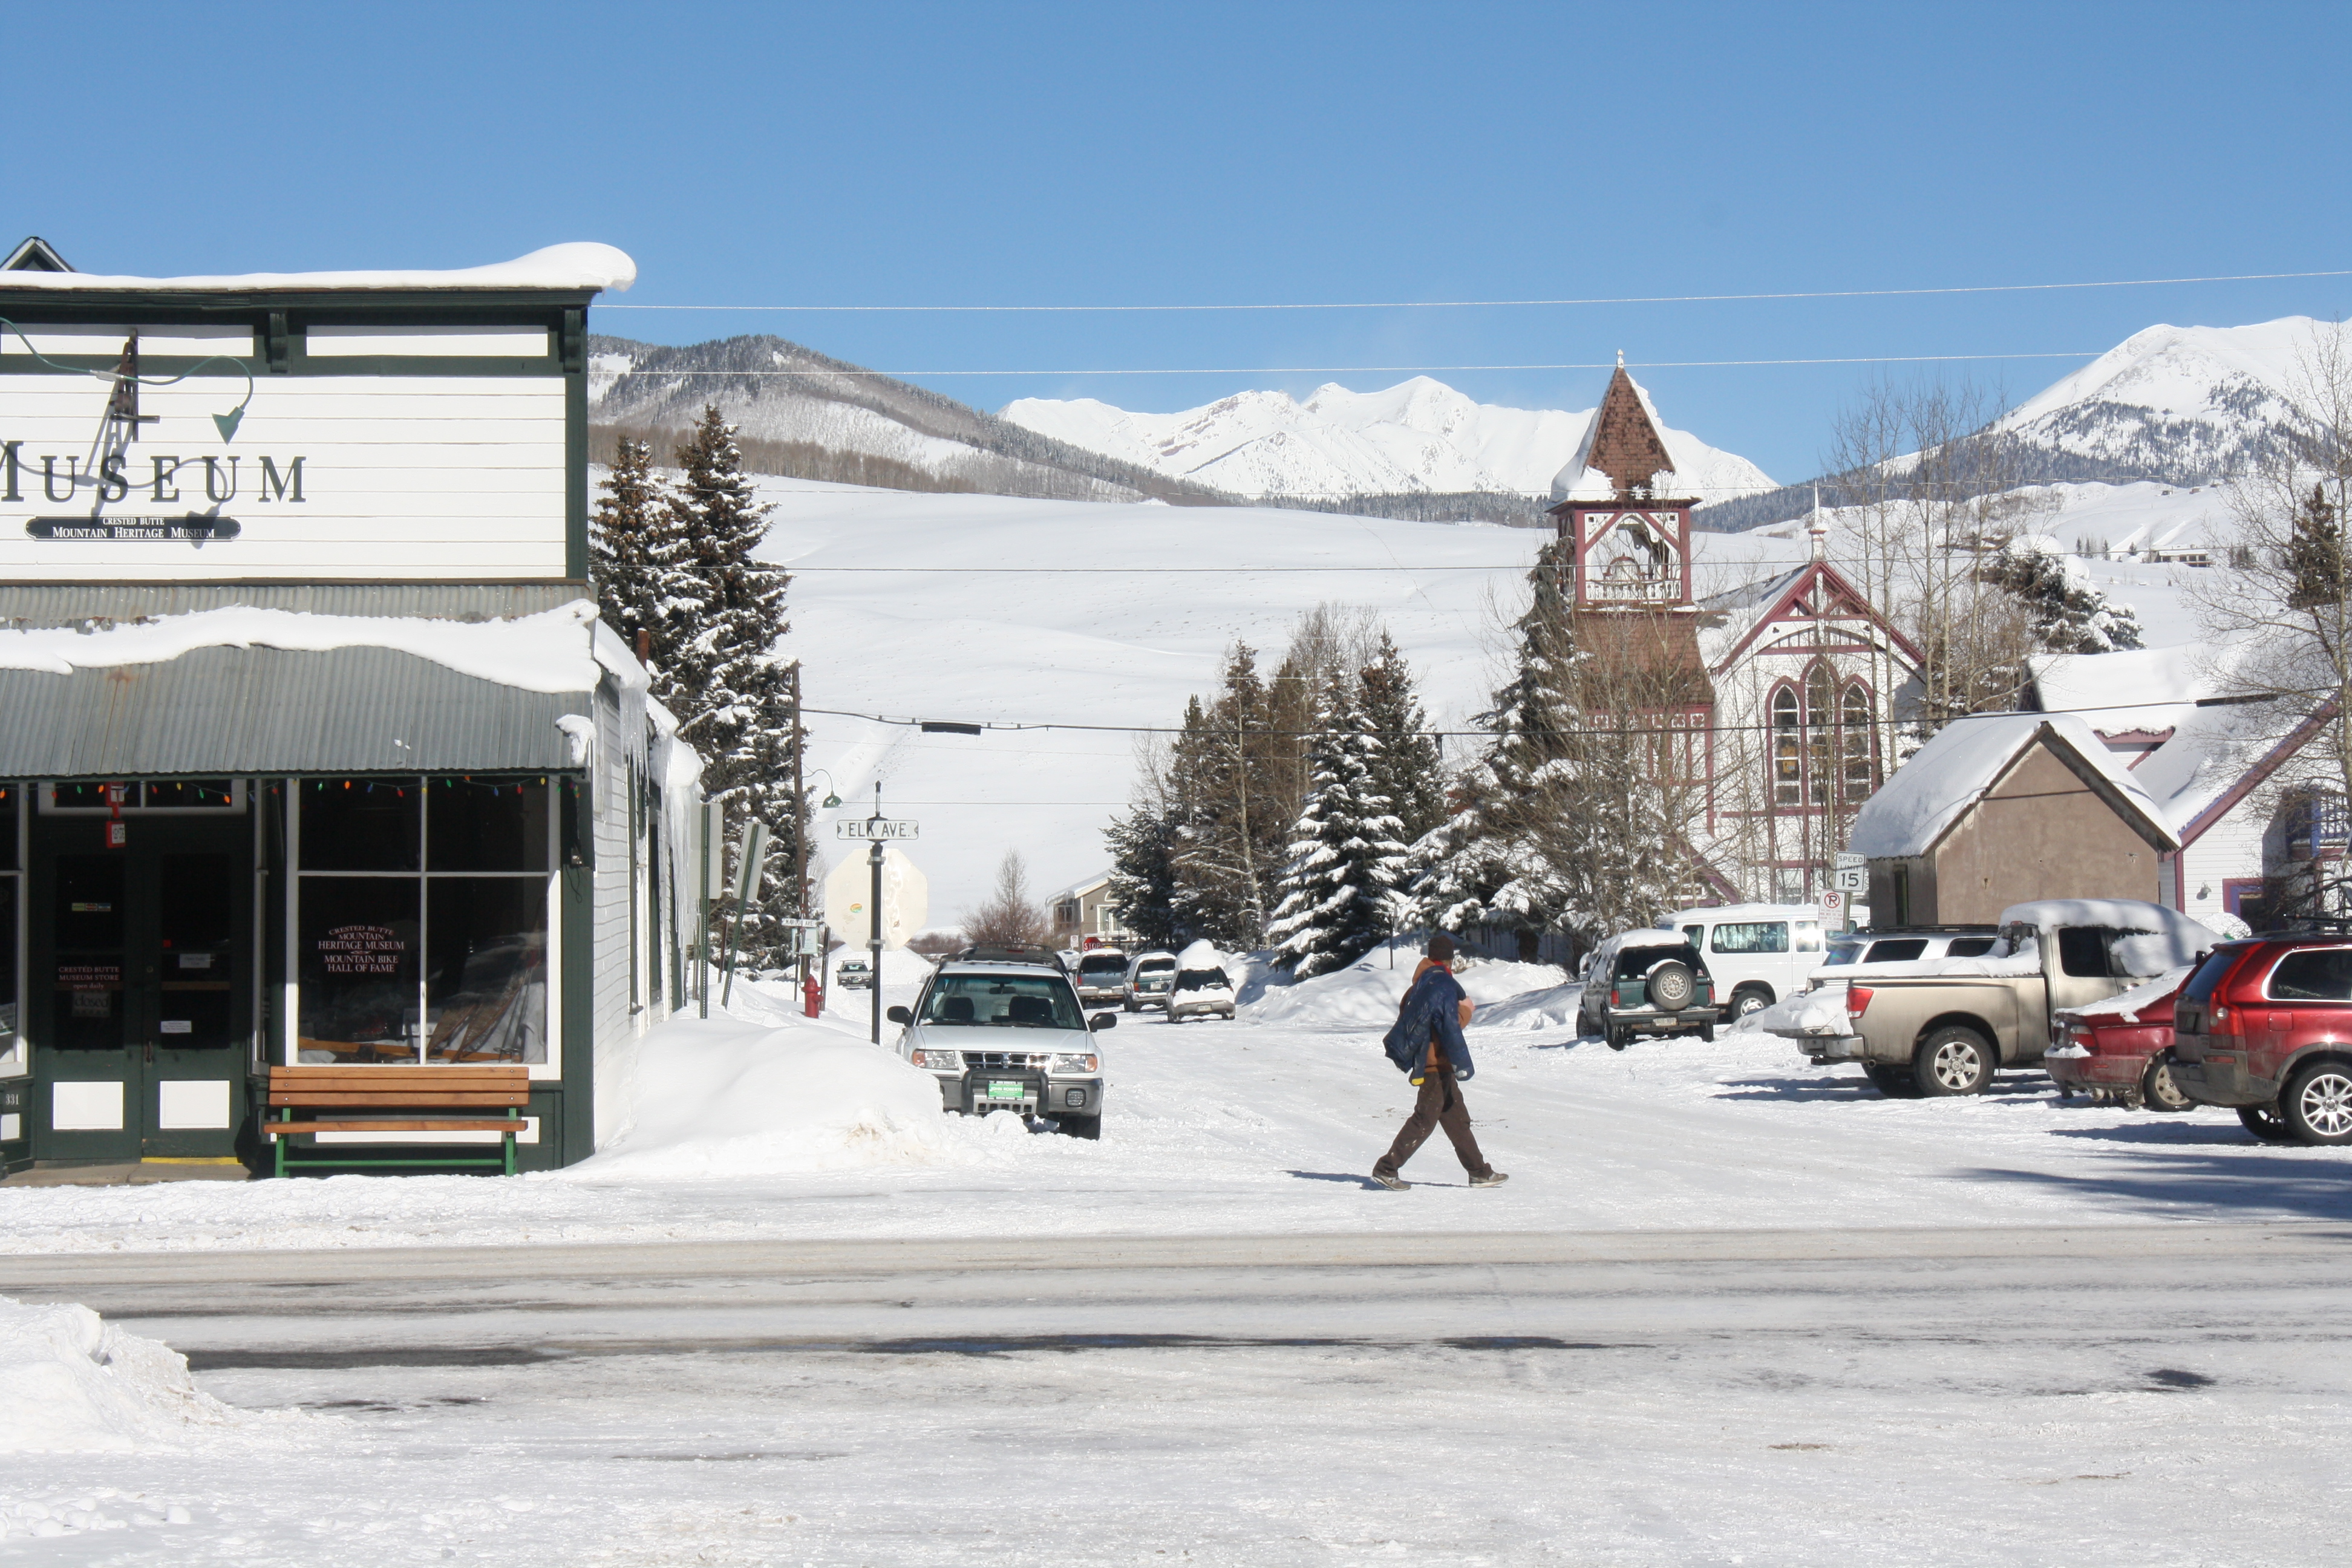 “Crested Butte,” The Washington Post